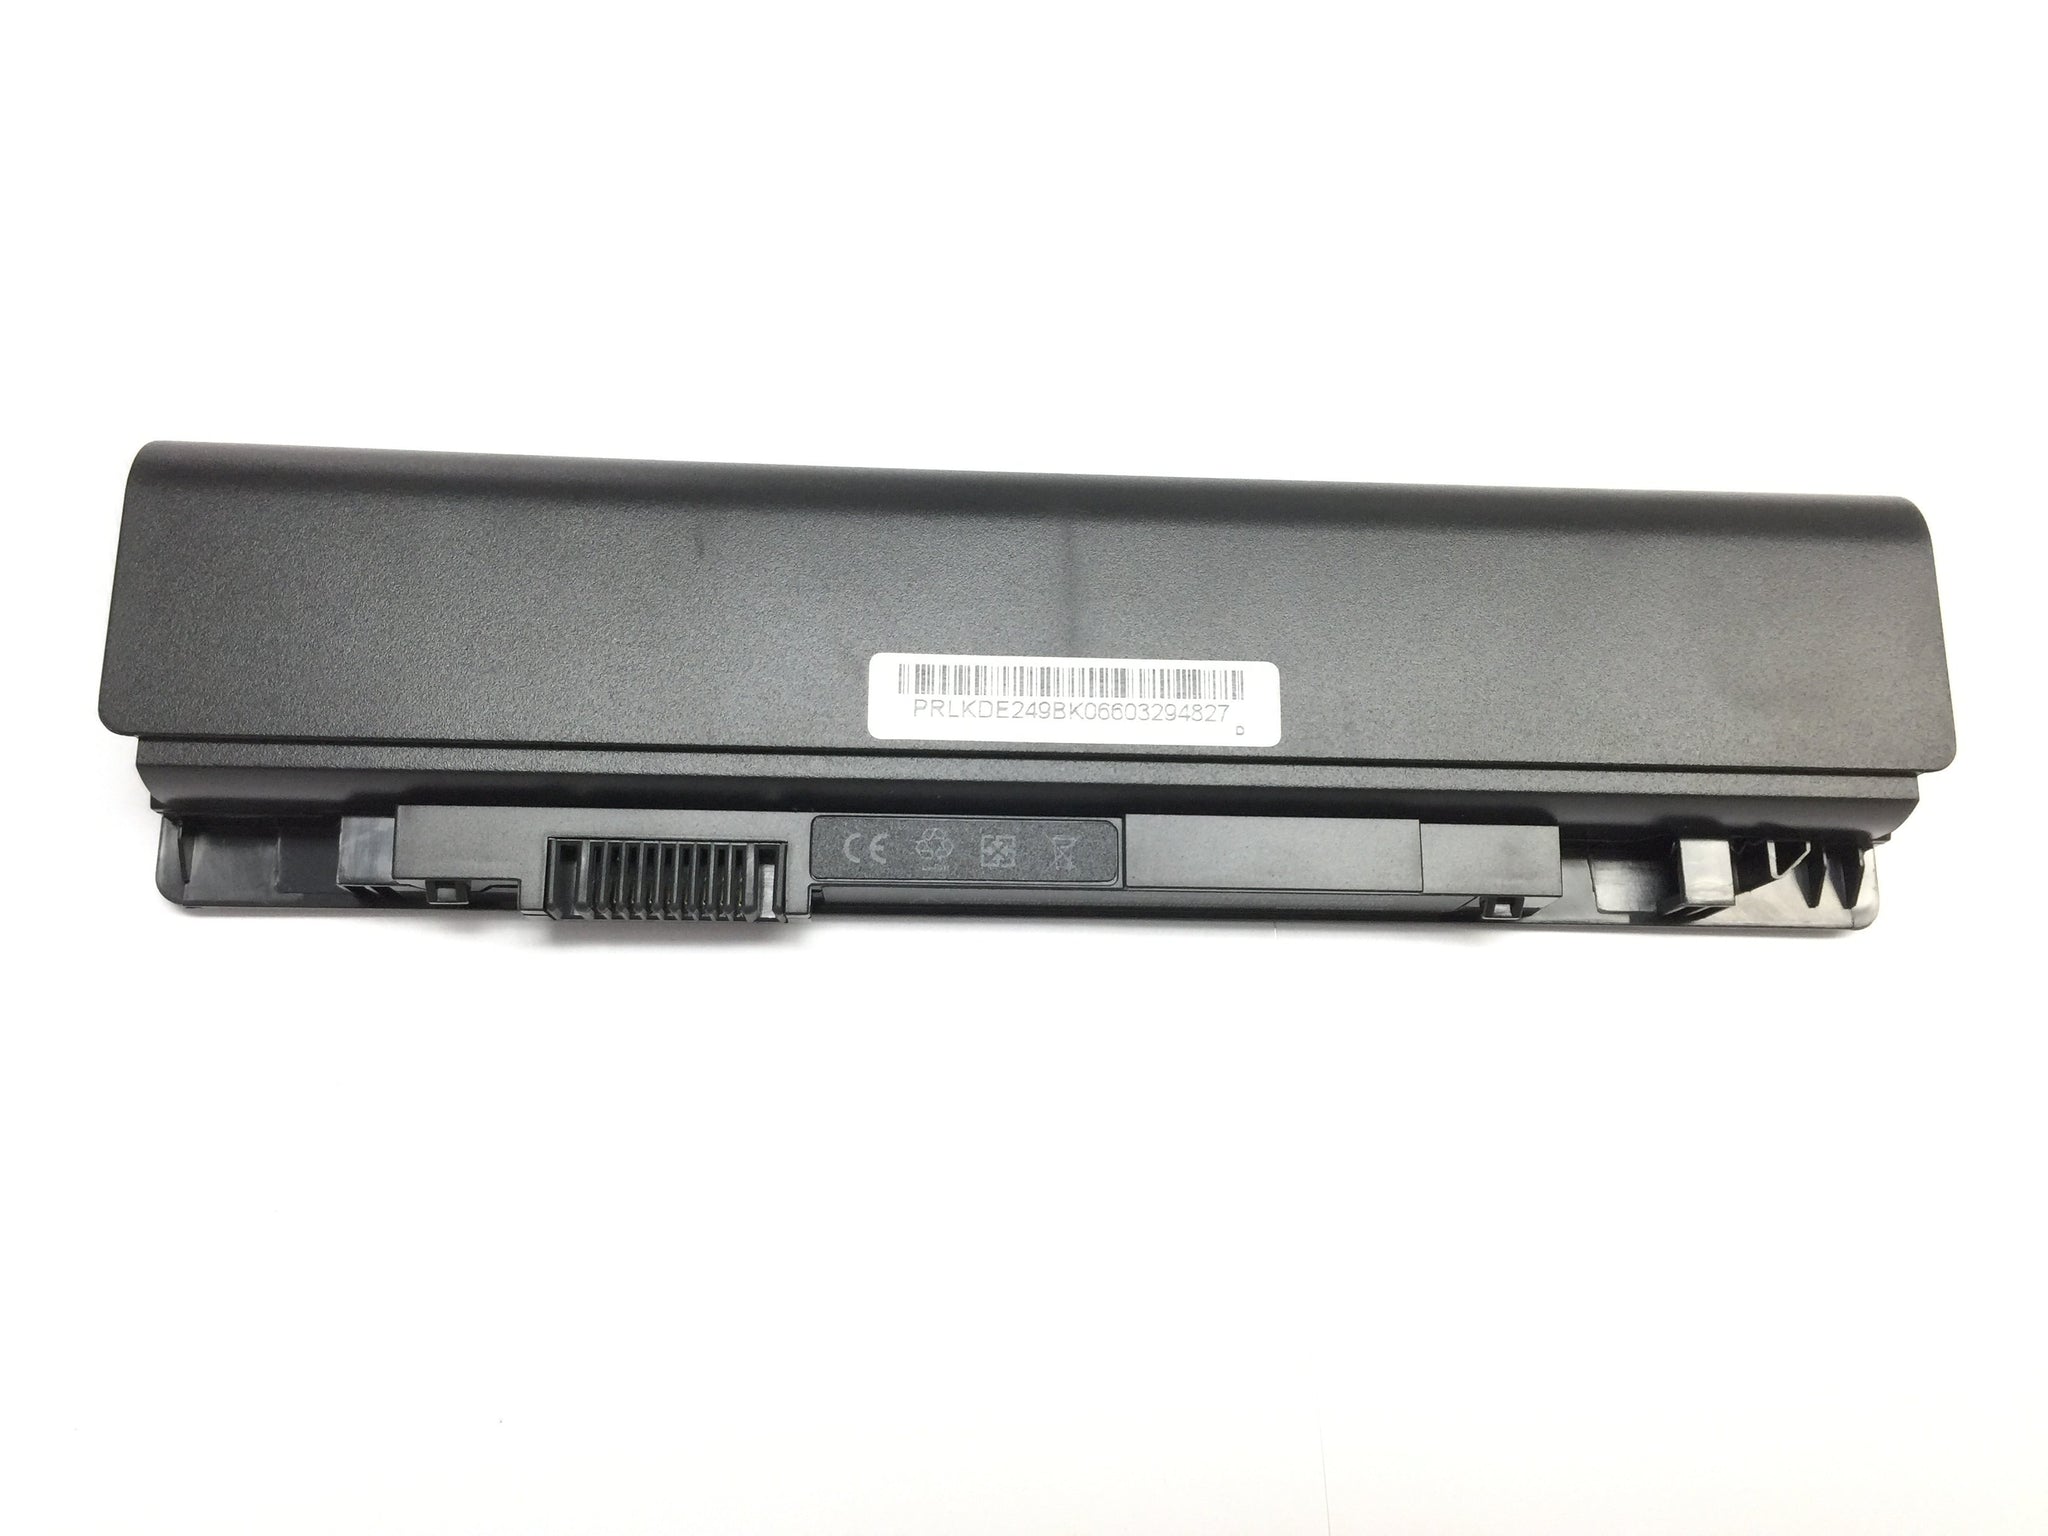 11.1V 7200mAh(80Wh) 6DN3N, 9RDF4 laptop battery compatible with Dell P04F001, P04G001, Inspiron 1570n, Inspiron 1470n